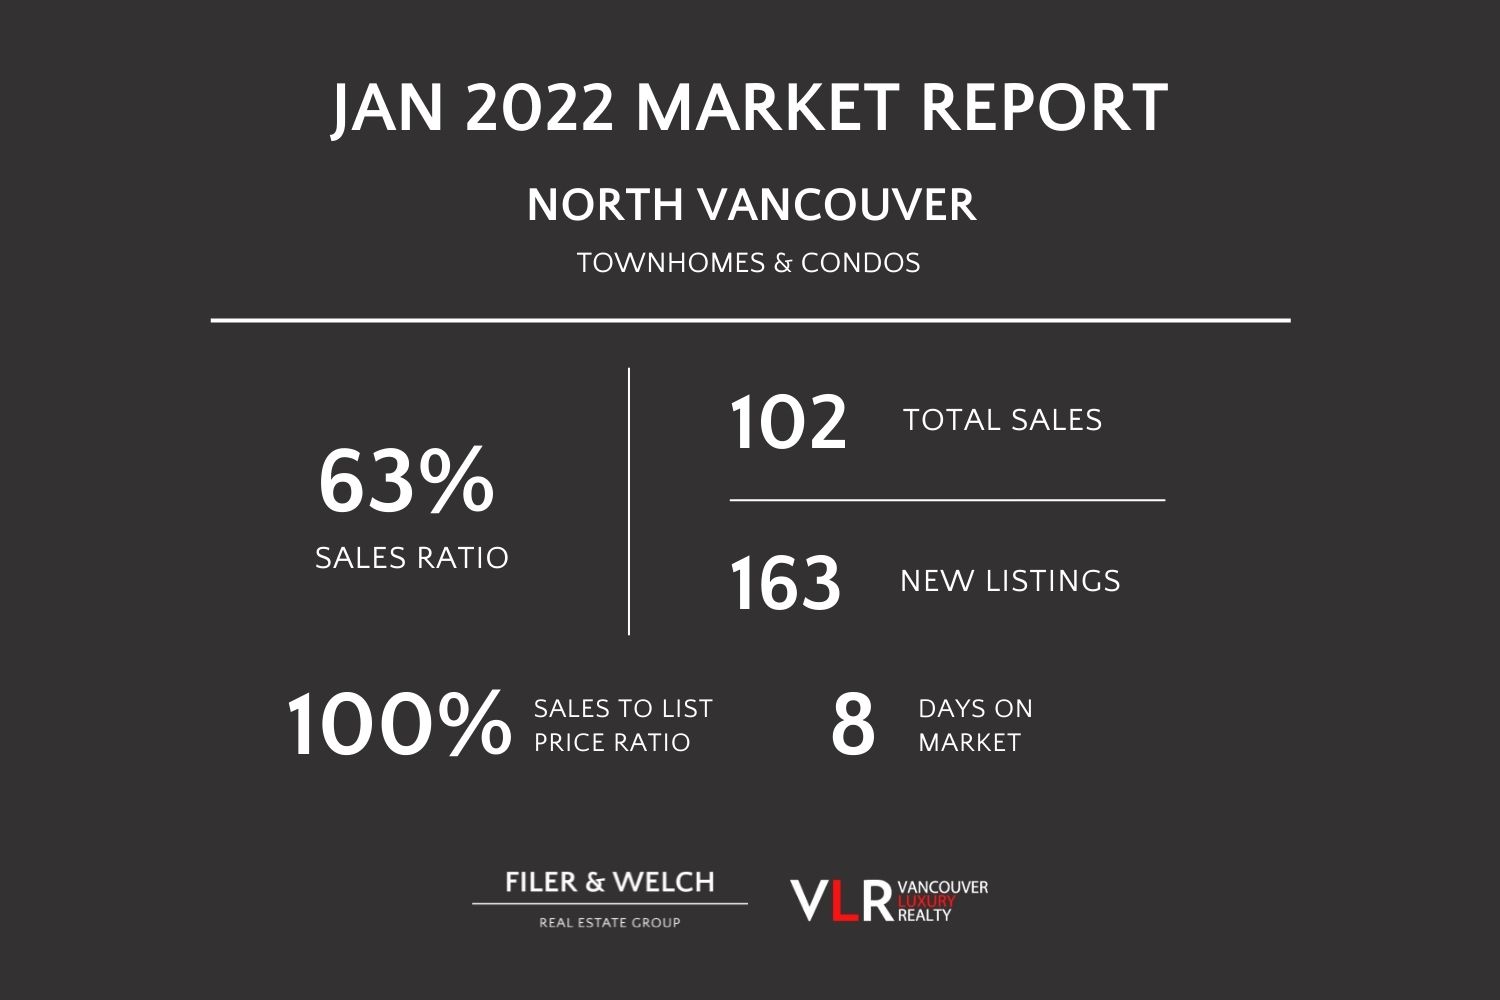 North Vancouver condos townhomes sales ratio 63 in January 2022